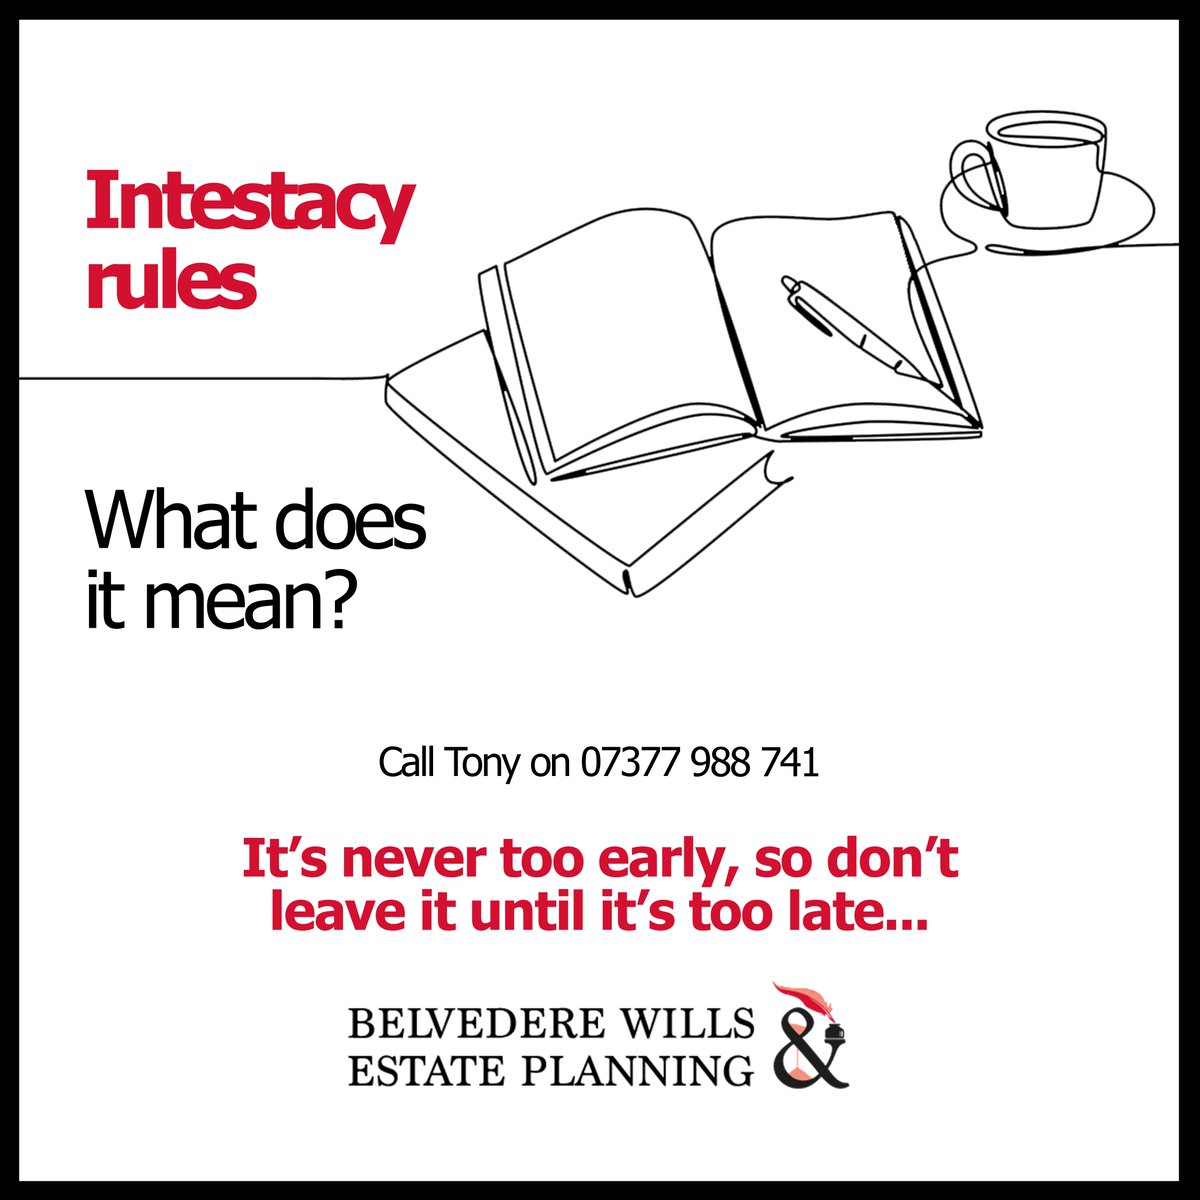 Haven’t got a Will?
If someone passes away the law may decides who gets what - intestacy rules apply.
Ensure your assets are distributed as you wish.

Get in touch here bit.ly/44u8kwz 

#estateplanning #takecontrol #belvederewills #inheritancerights #willwritingservice